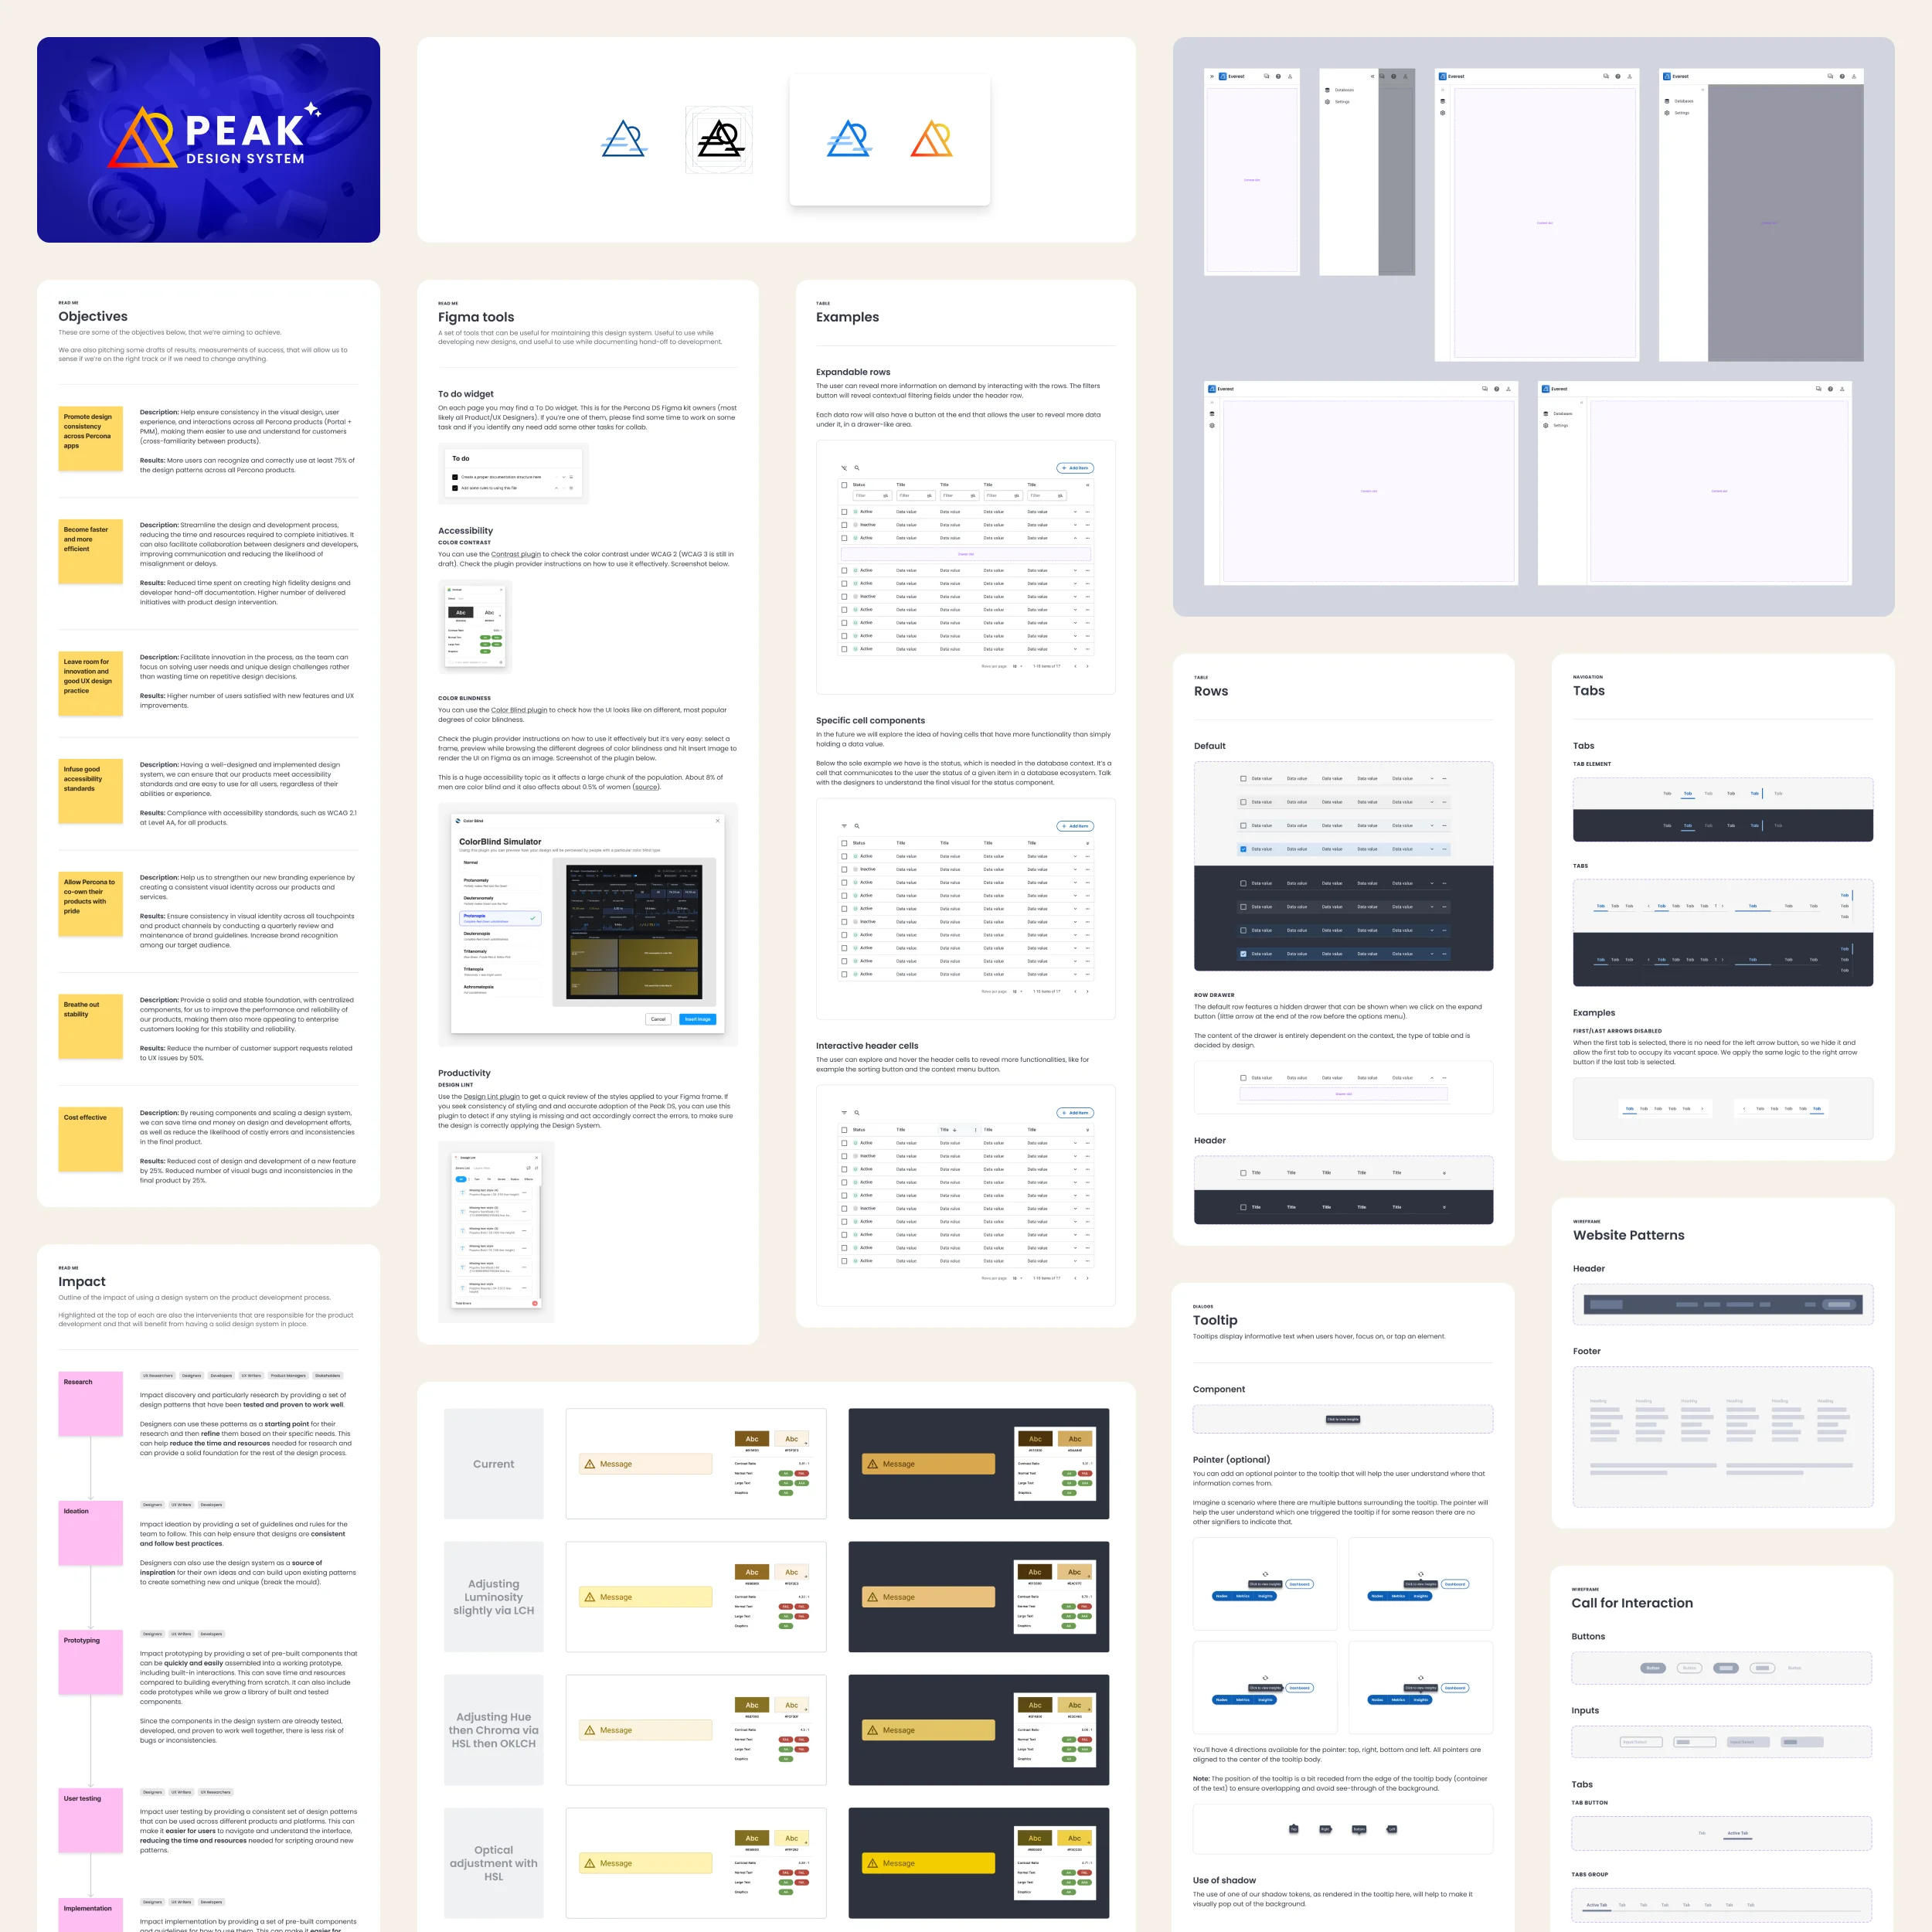 Compilation of screenshots of the design system’s documentation pages with examples of components and styles.